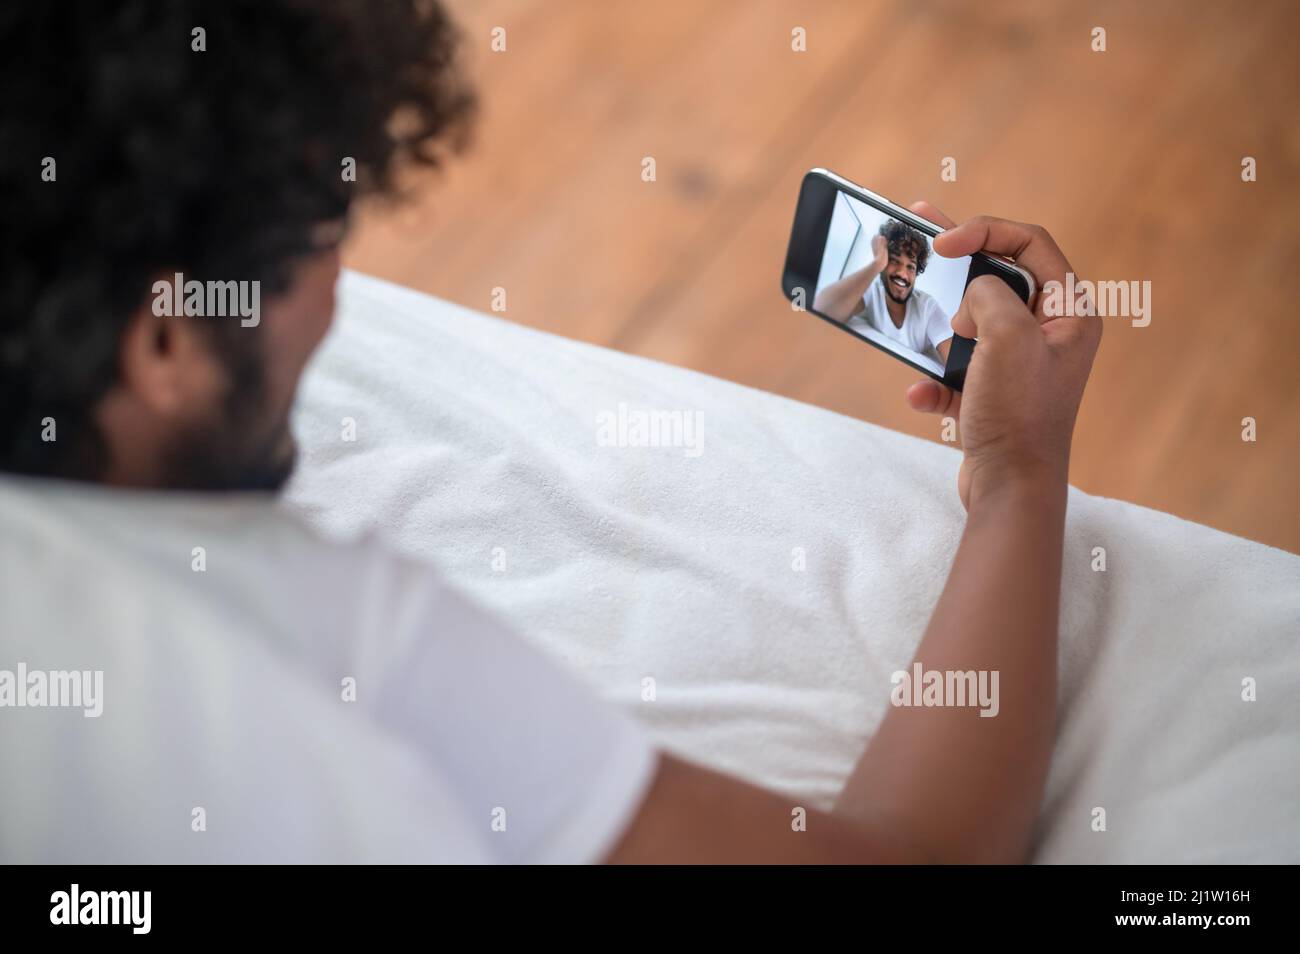 Curly-haired guy photographing himself with his cellphone Stock Photo